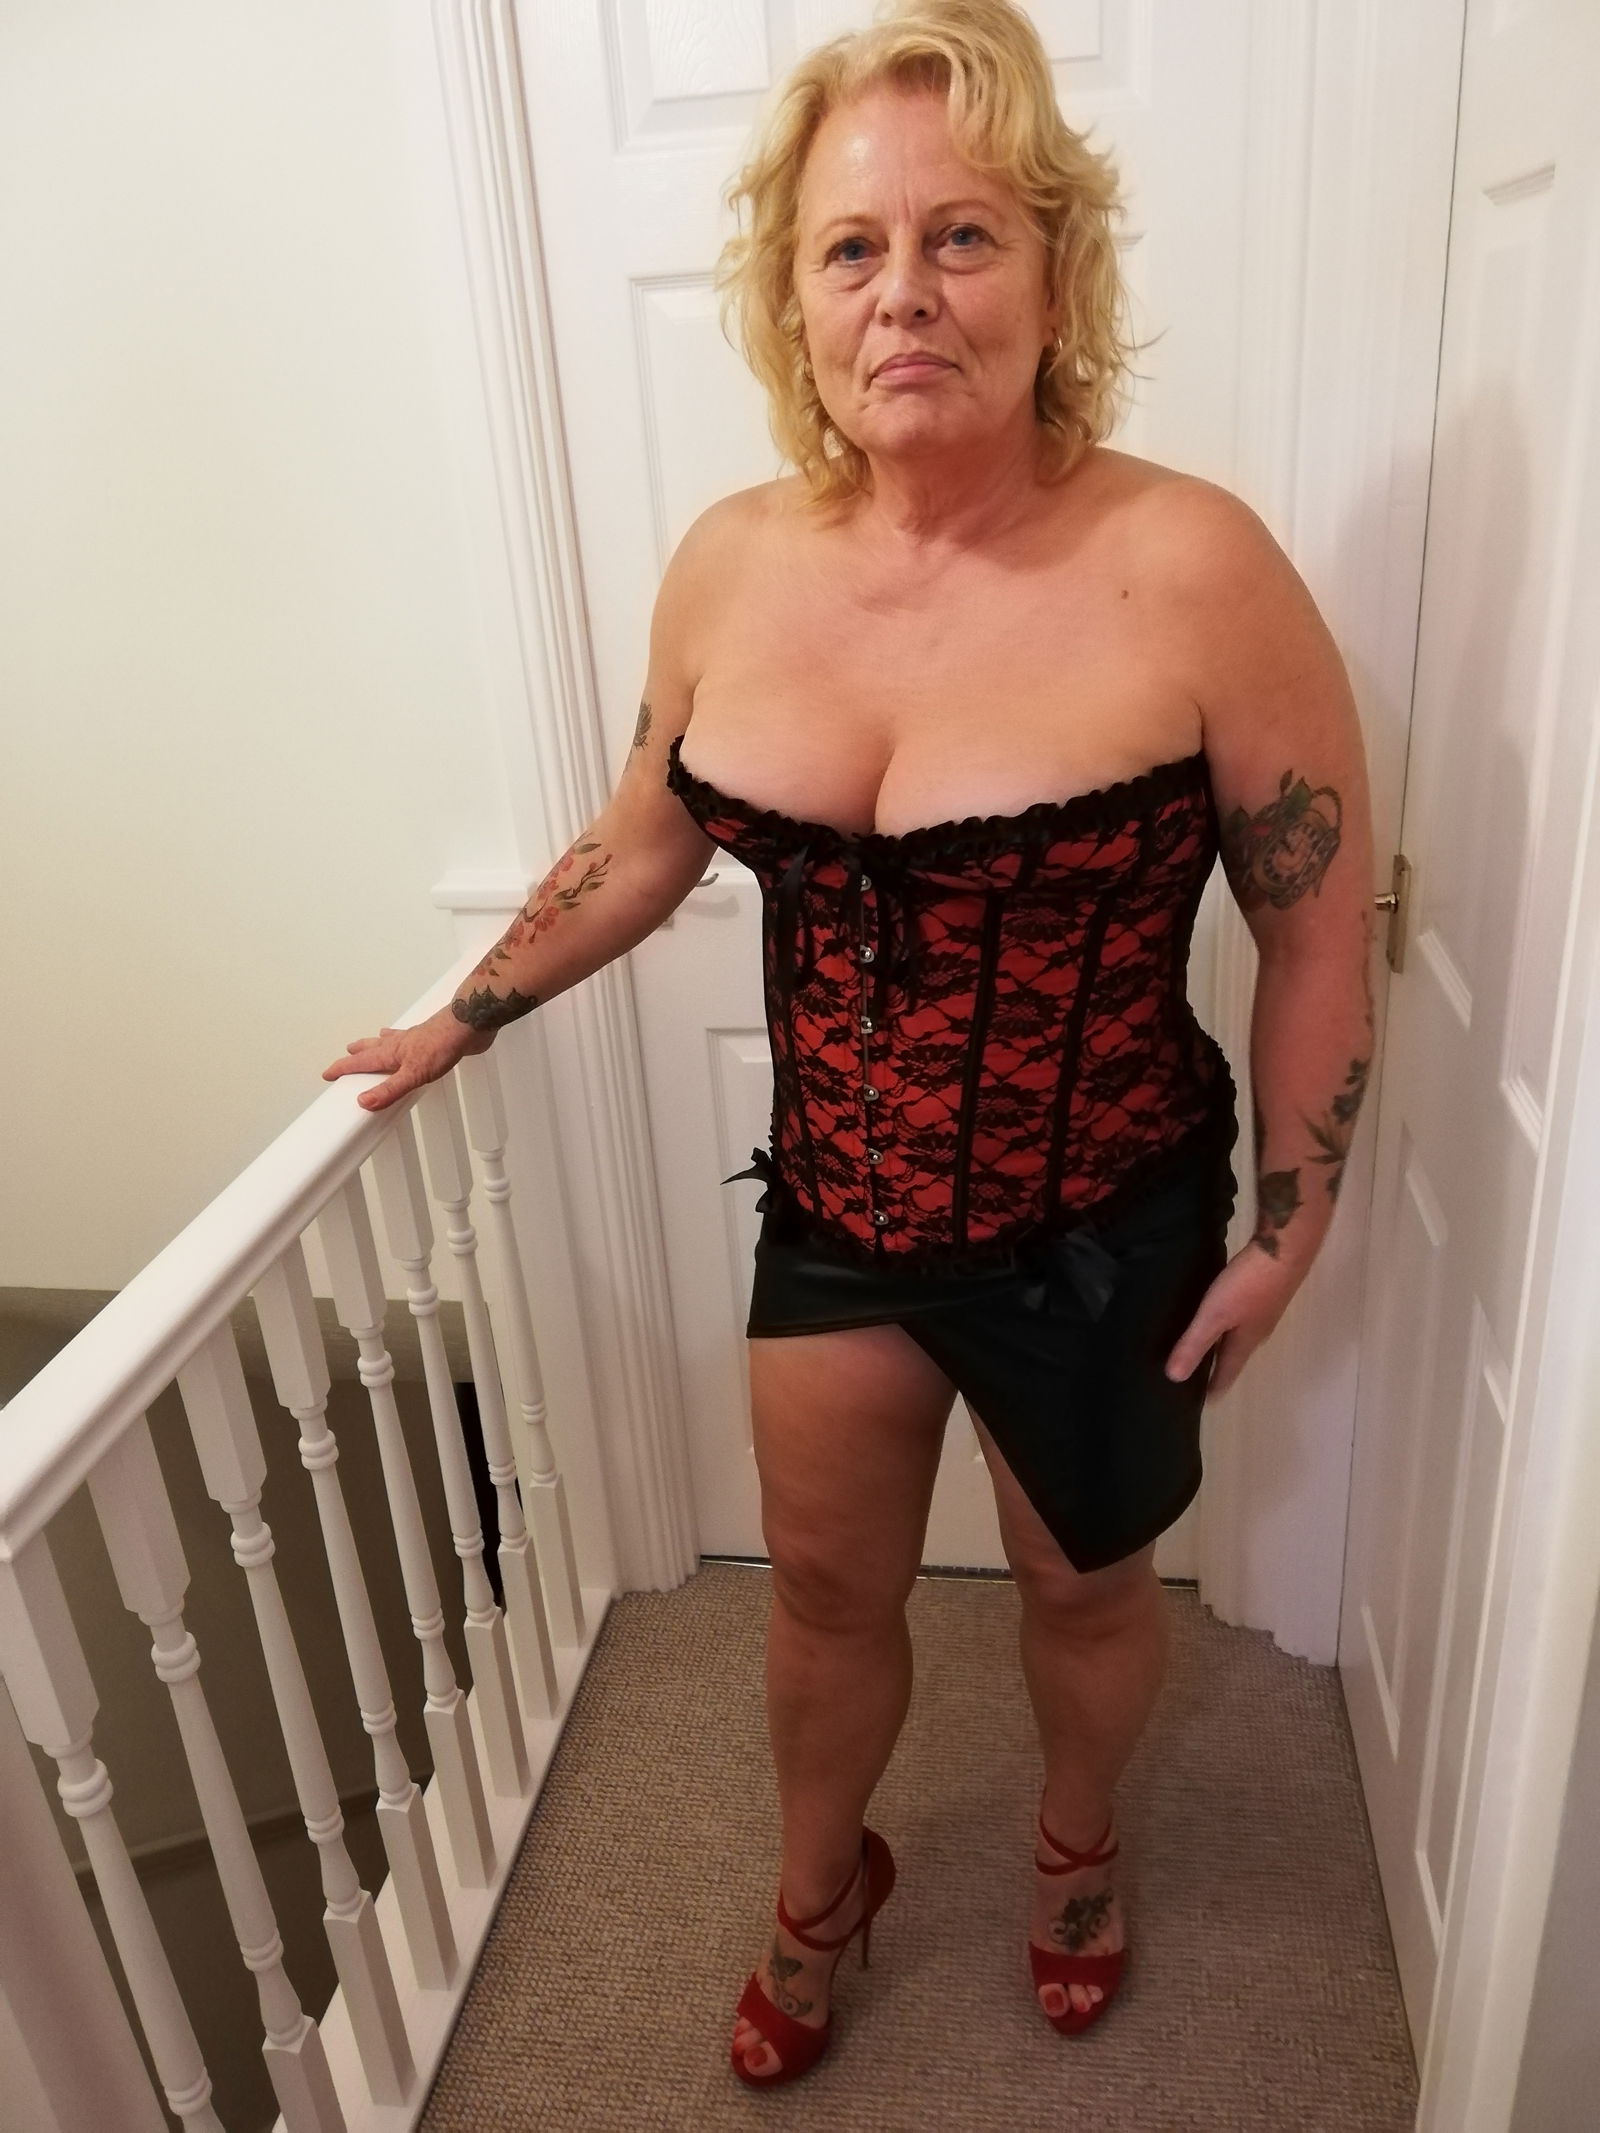 Watch the Photo by Mr. & Mrs. B with the username @Dickieboy07, who is a verified user, posted on September 6, 2020. The post is about the topic MILF. and the text says 'Thank you for all the likes, comments and share we get, the more we get the more we'll post

#hotwife #hotgirl #milf #gilf #cougar #vixen #stag #mature #wife #married #nan #gran #tattoo #tattoos #MFM #mfm #MMF #mmf #threesome #moresome #lingerie #heels..'